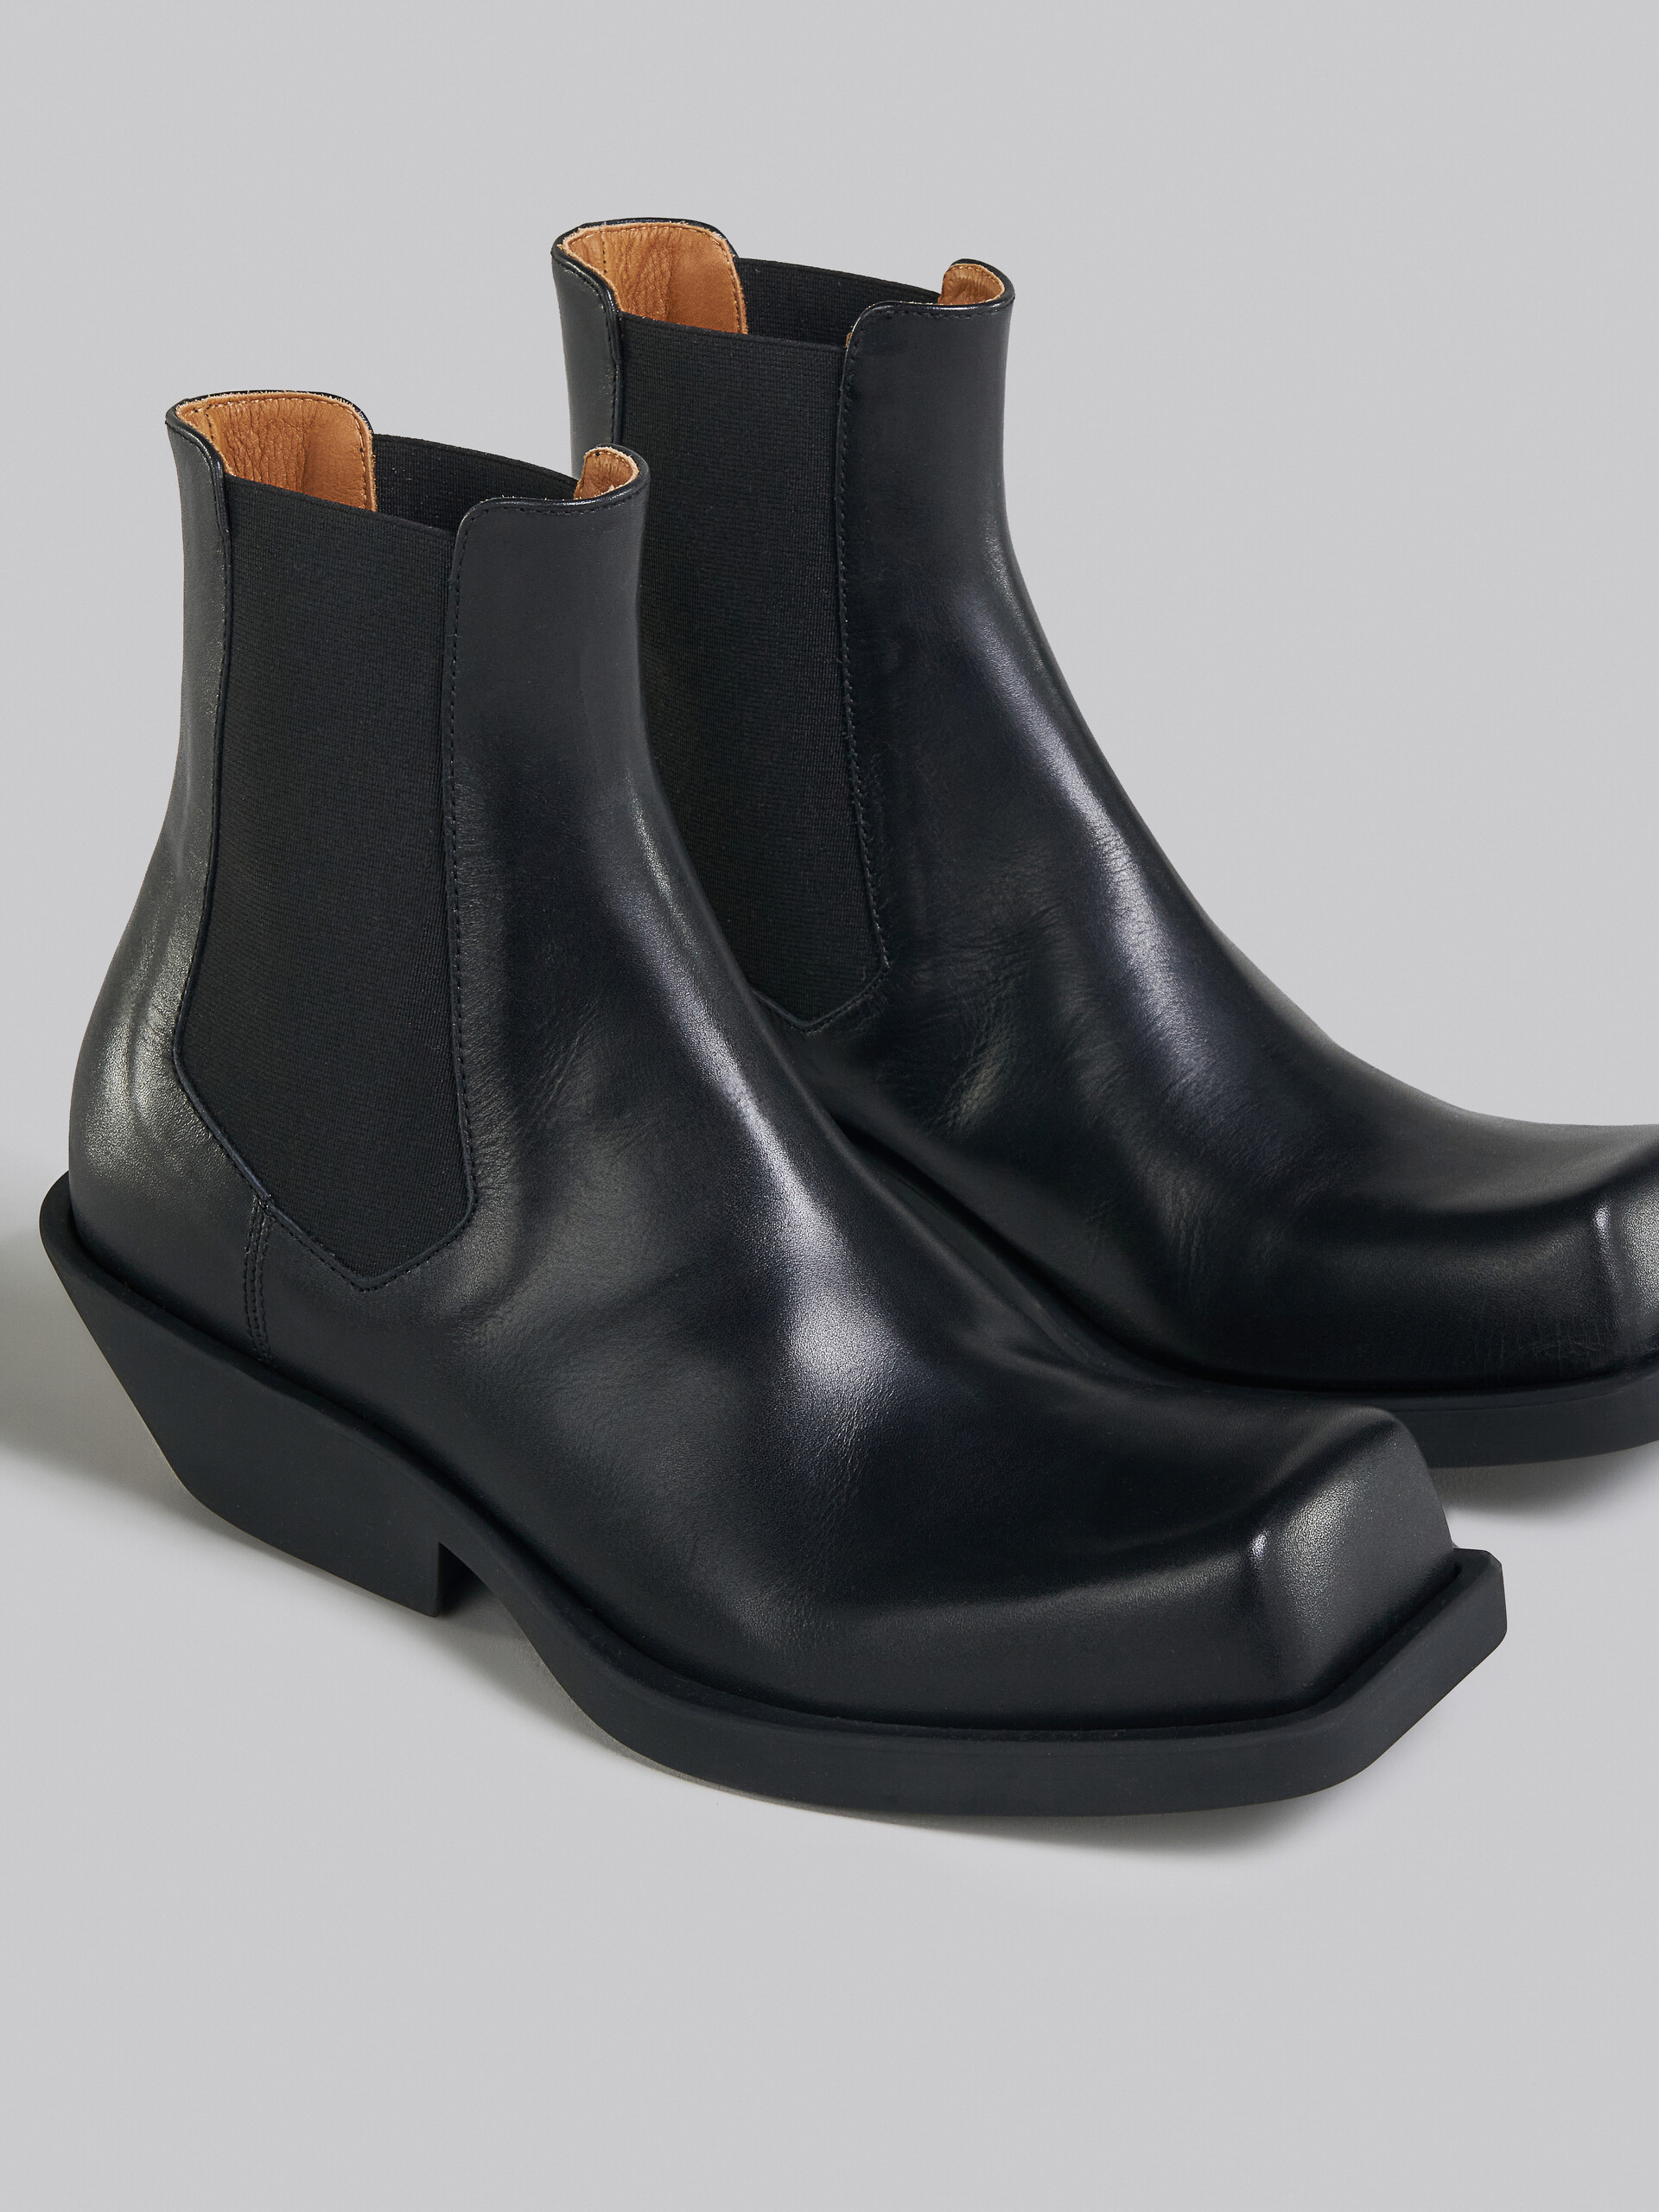 Black leather Chelsea boot - Boots - Image 4